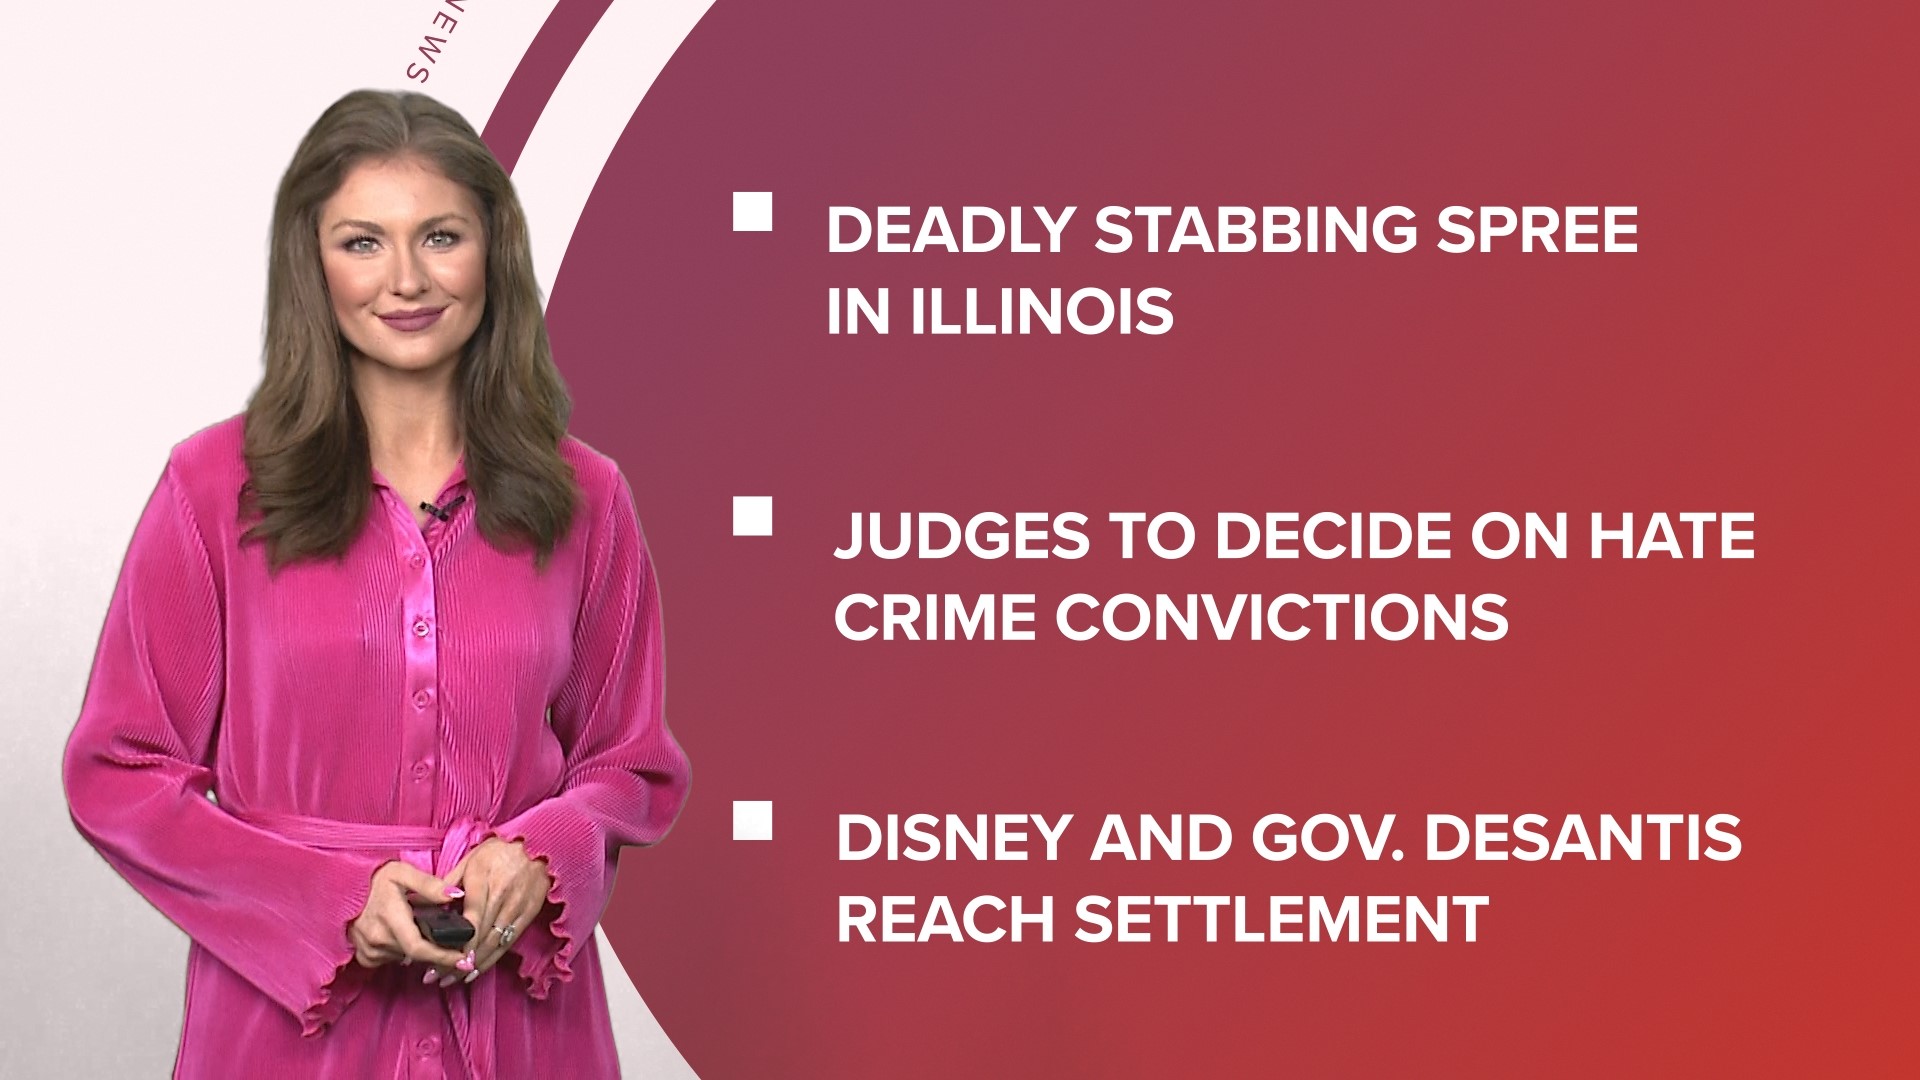 A look at what is happening in the news from a deadly stabbing spree in Illinois to Disney and Gov. DeSantis reach a settlement and new DQ blizzard flavors.